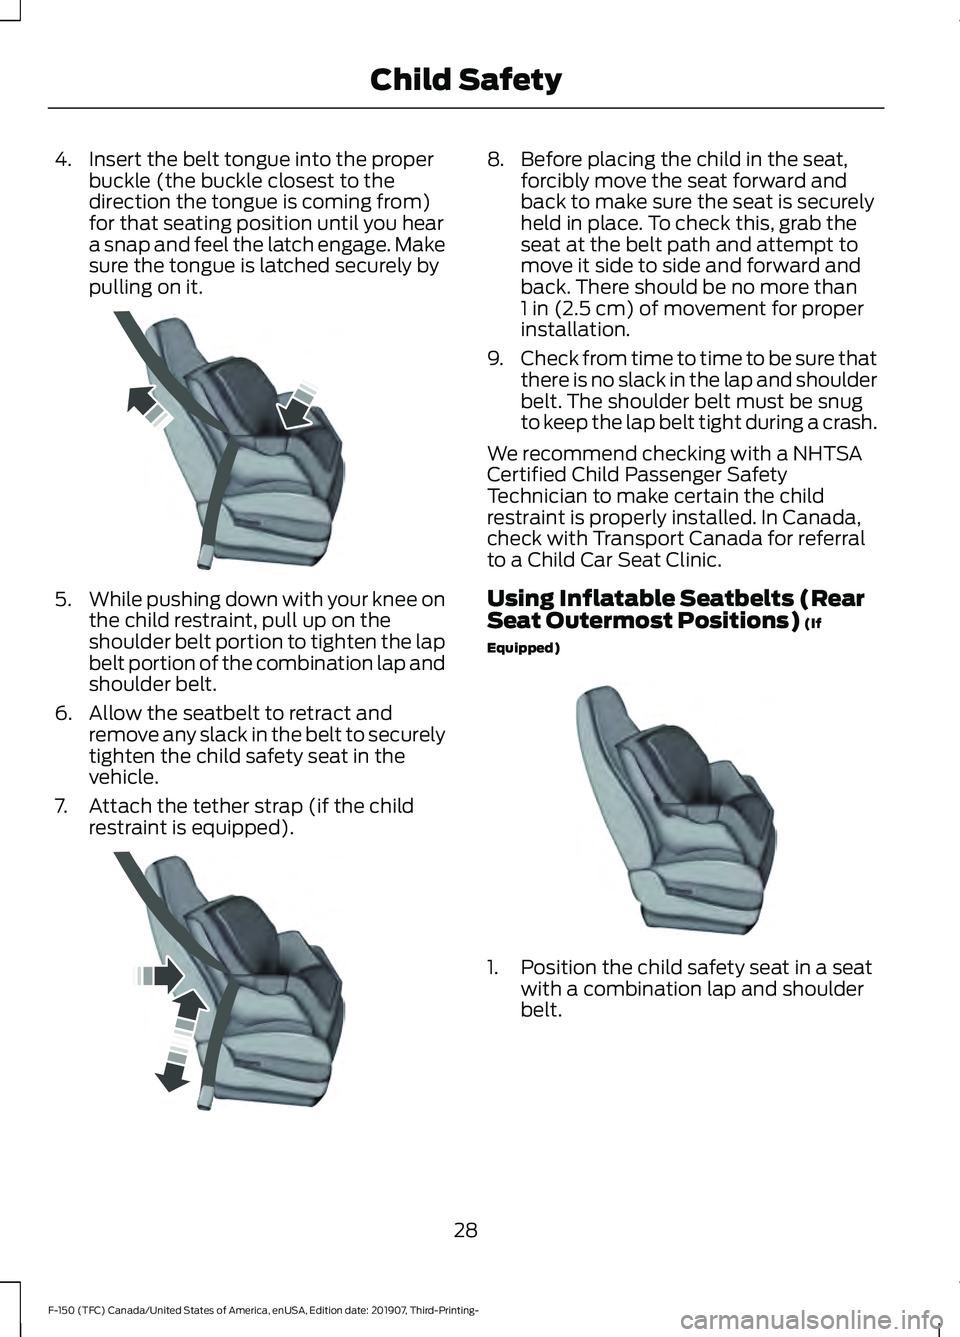 FORD F-150 2020  Owners Manual 4. Insert the belt tongue into the proper
buckle (the buckle closest to the
direction the tongue is coming from)
for that seating position until you hear
a snap and feel the latch engage. Make
sure th